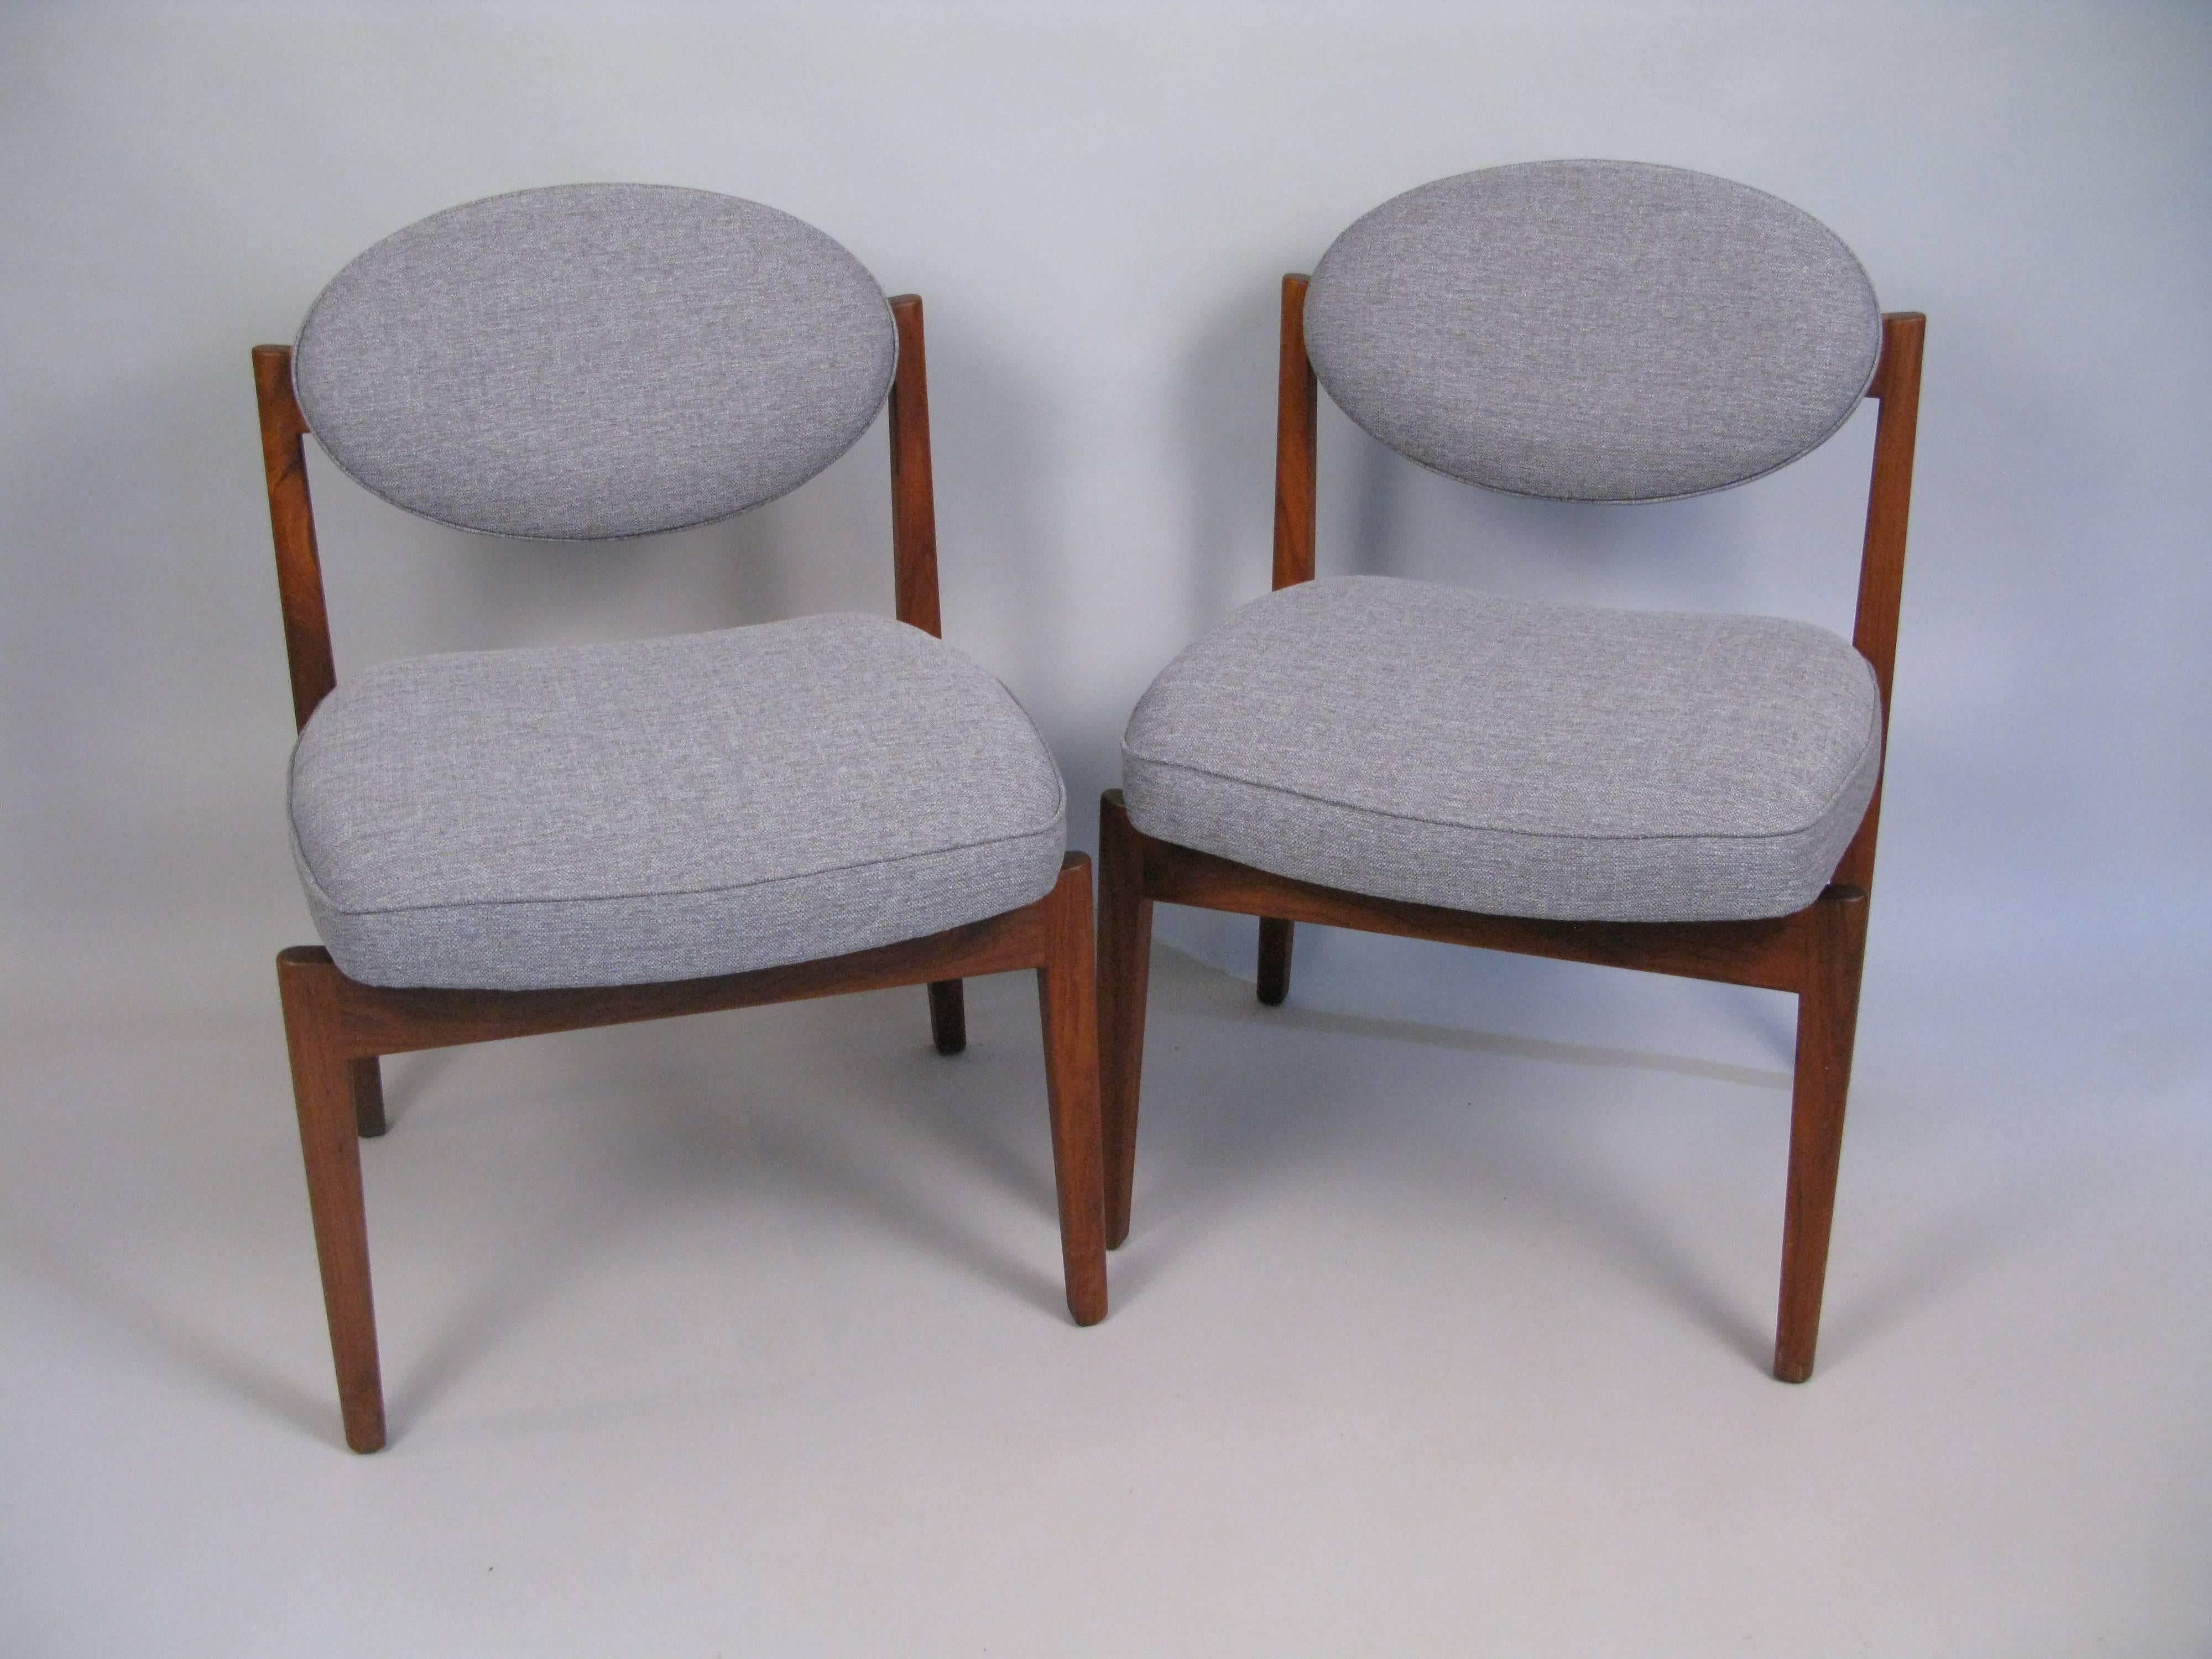 Elegant pair of 1960s teak Jens Risom armless upholstered chairs. Large deep seats and oval backs. The chairs have new upholstery and the teak finish has been polished. Sturdy weight. Risom Label is underside.